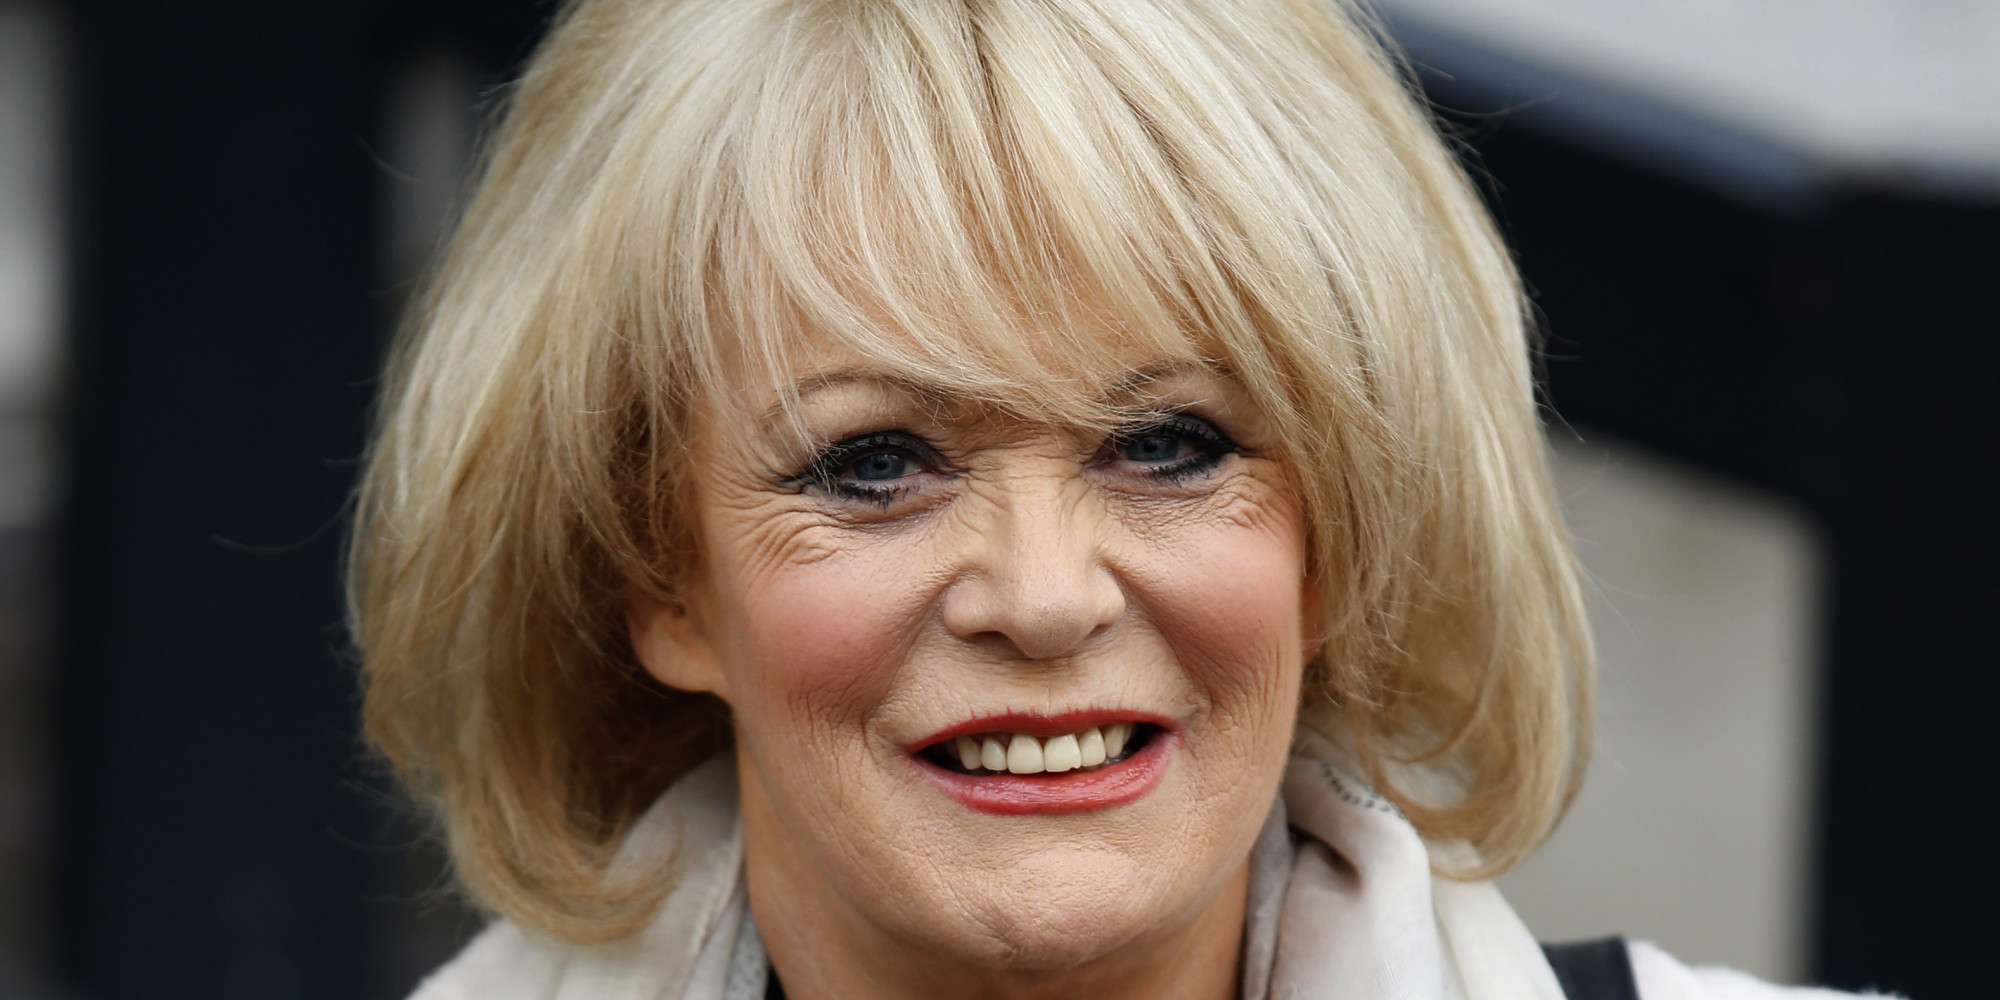 'Celebrity Big Brother' 2015: Loose Women's Sherrie Hewson Signs Up For New Series ...2000 x 1000